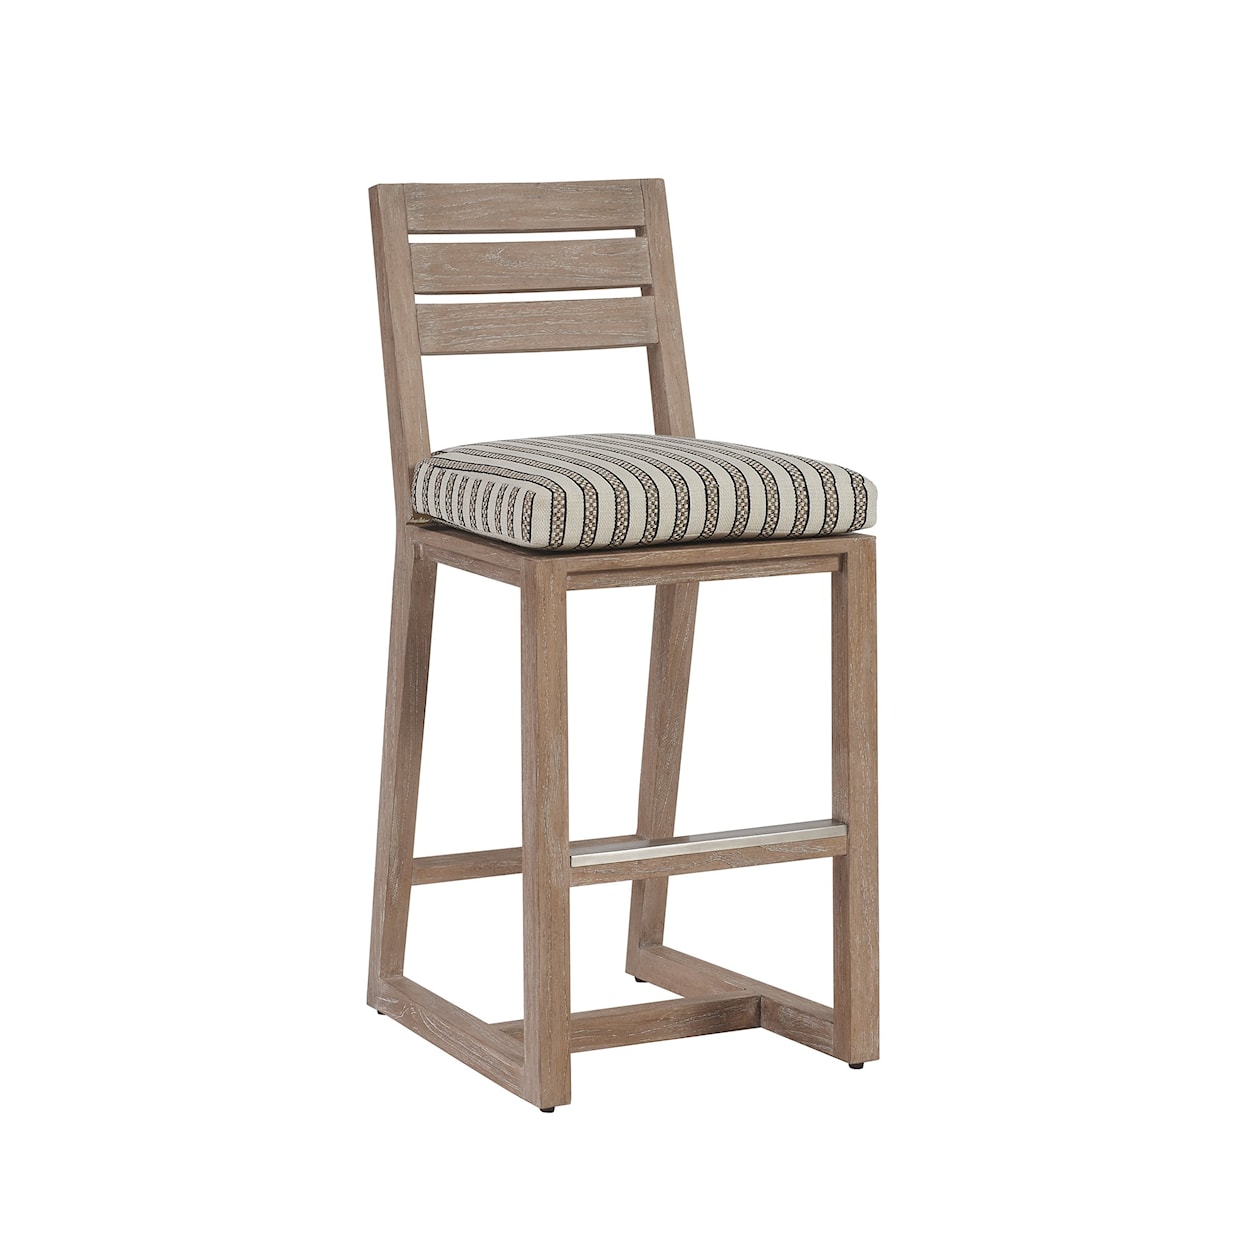 Tommy Bahama Outdoor Living Stillwater Cove Outdoor Bar Stool